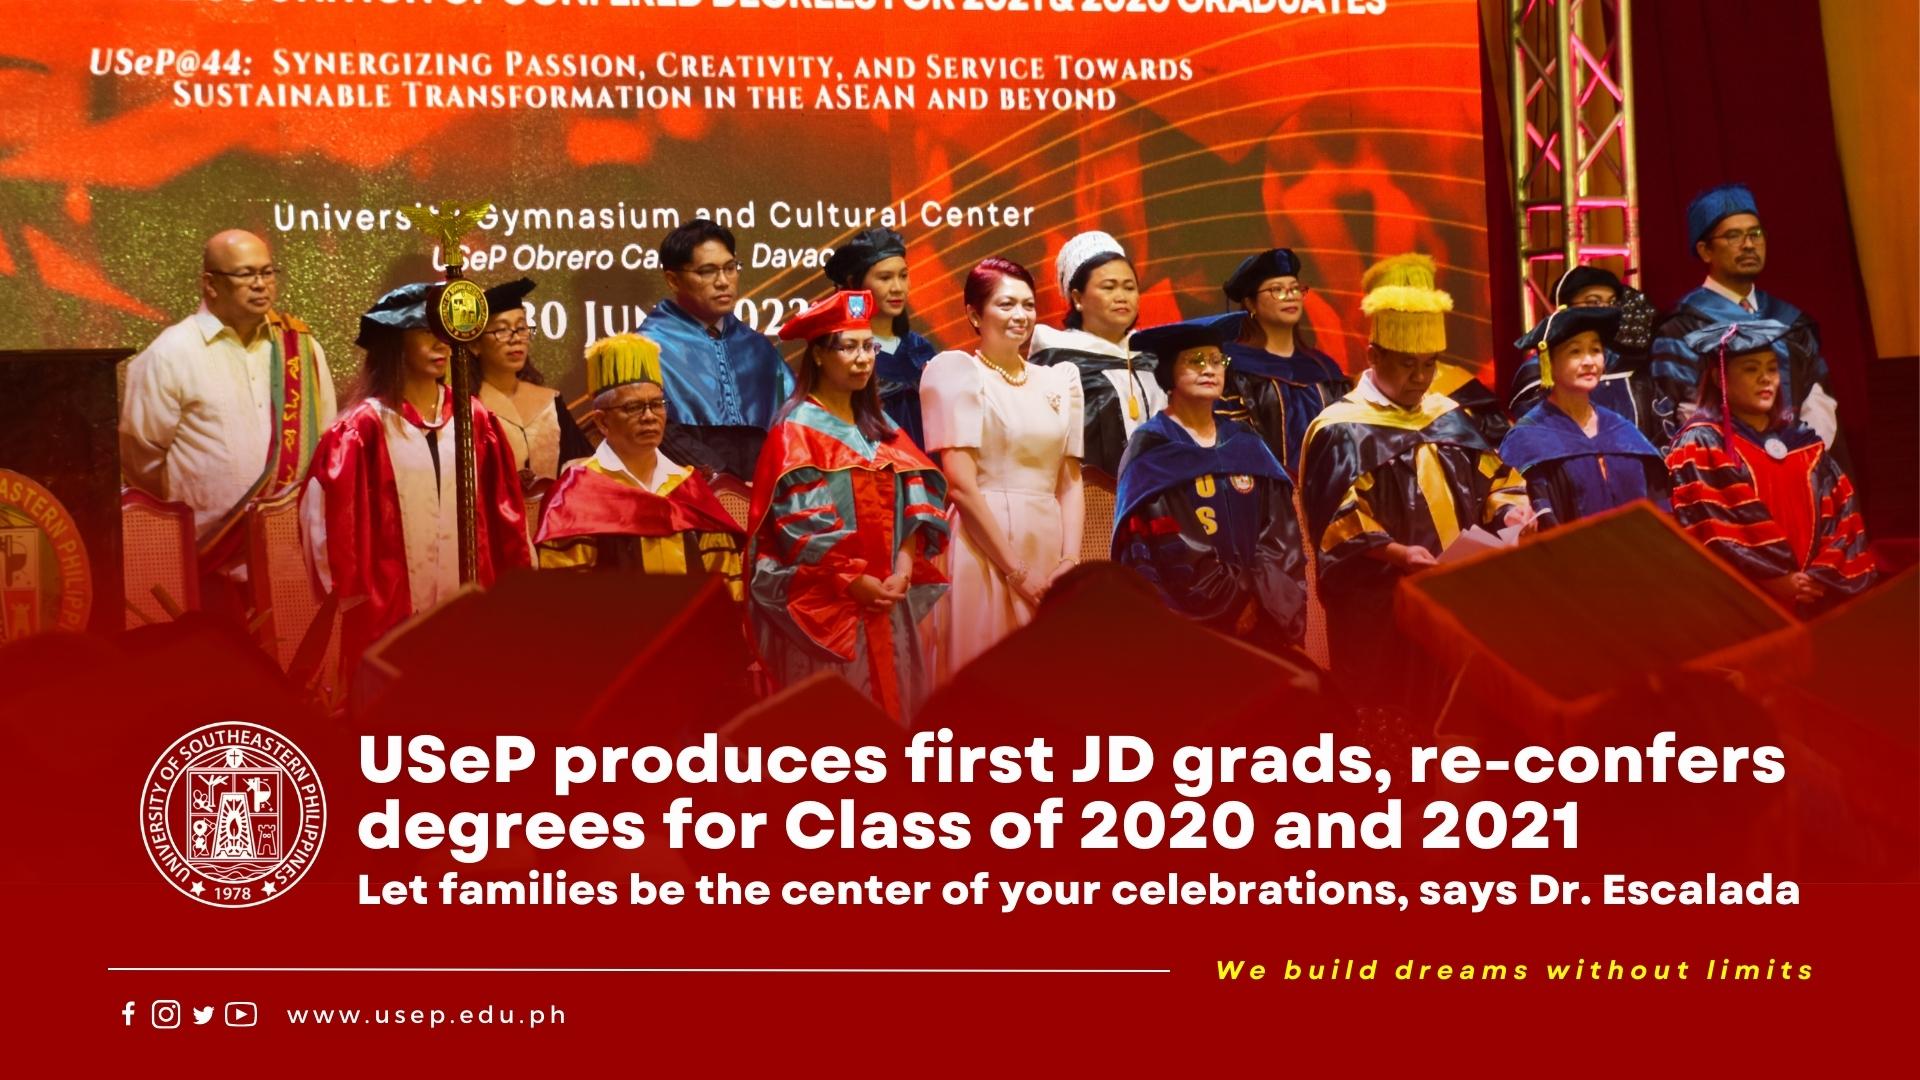 USeP produces first JD grads, re-confers degrees for Class of 2020 and 2021